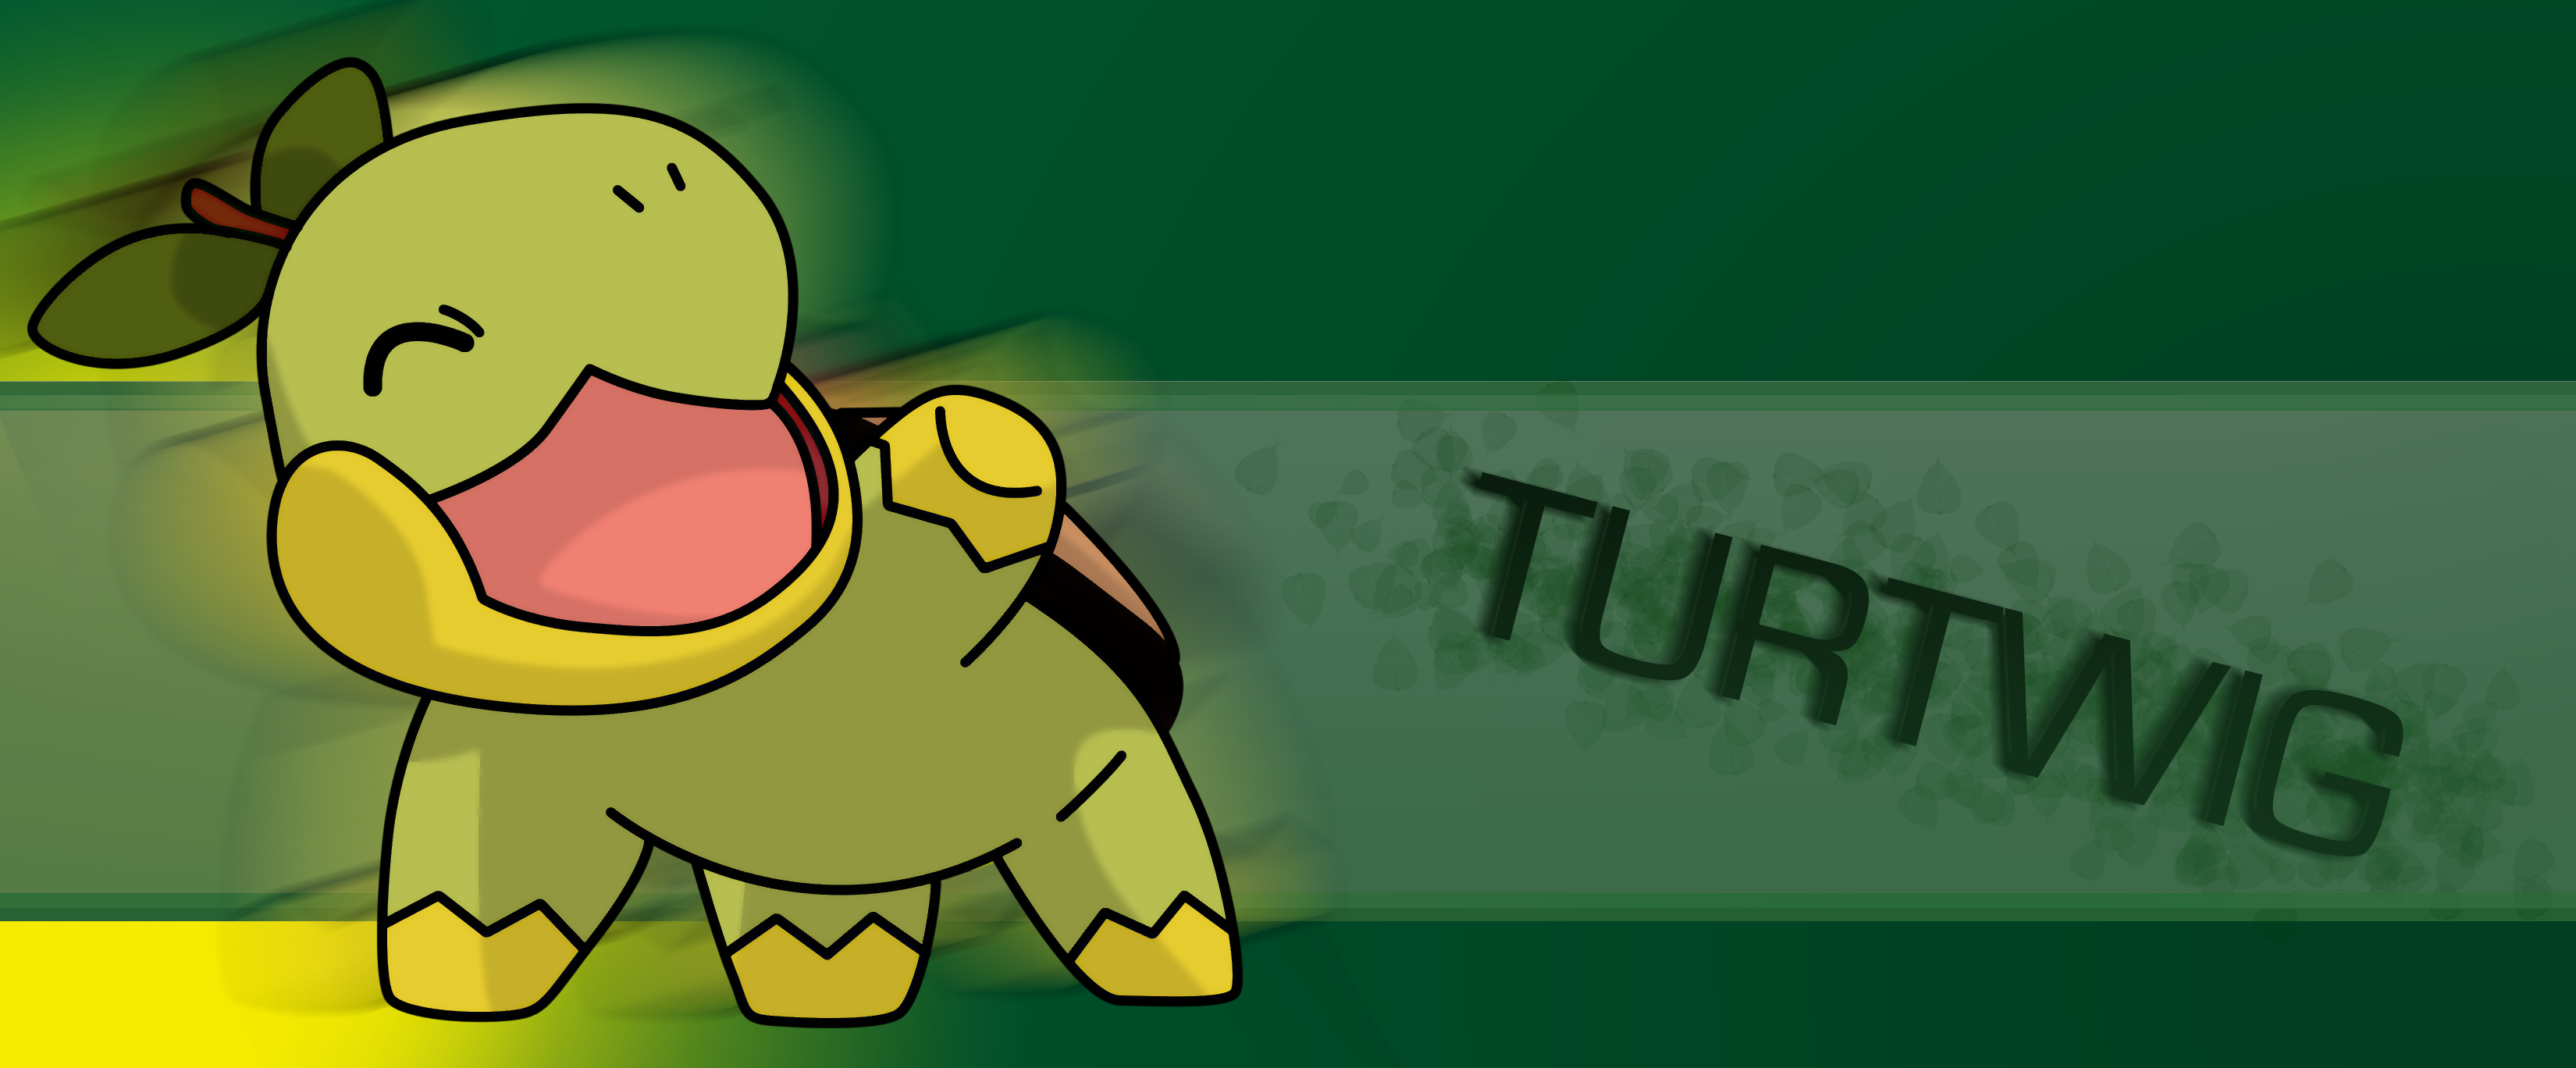 10+ Turtwig (Pokémon) HD Wallpapers and Backgrounds